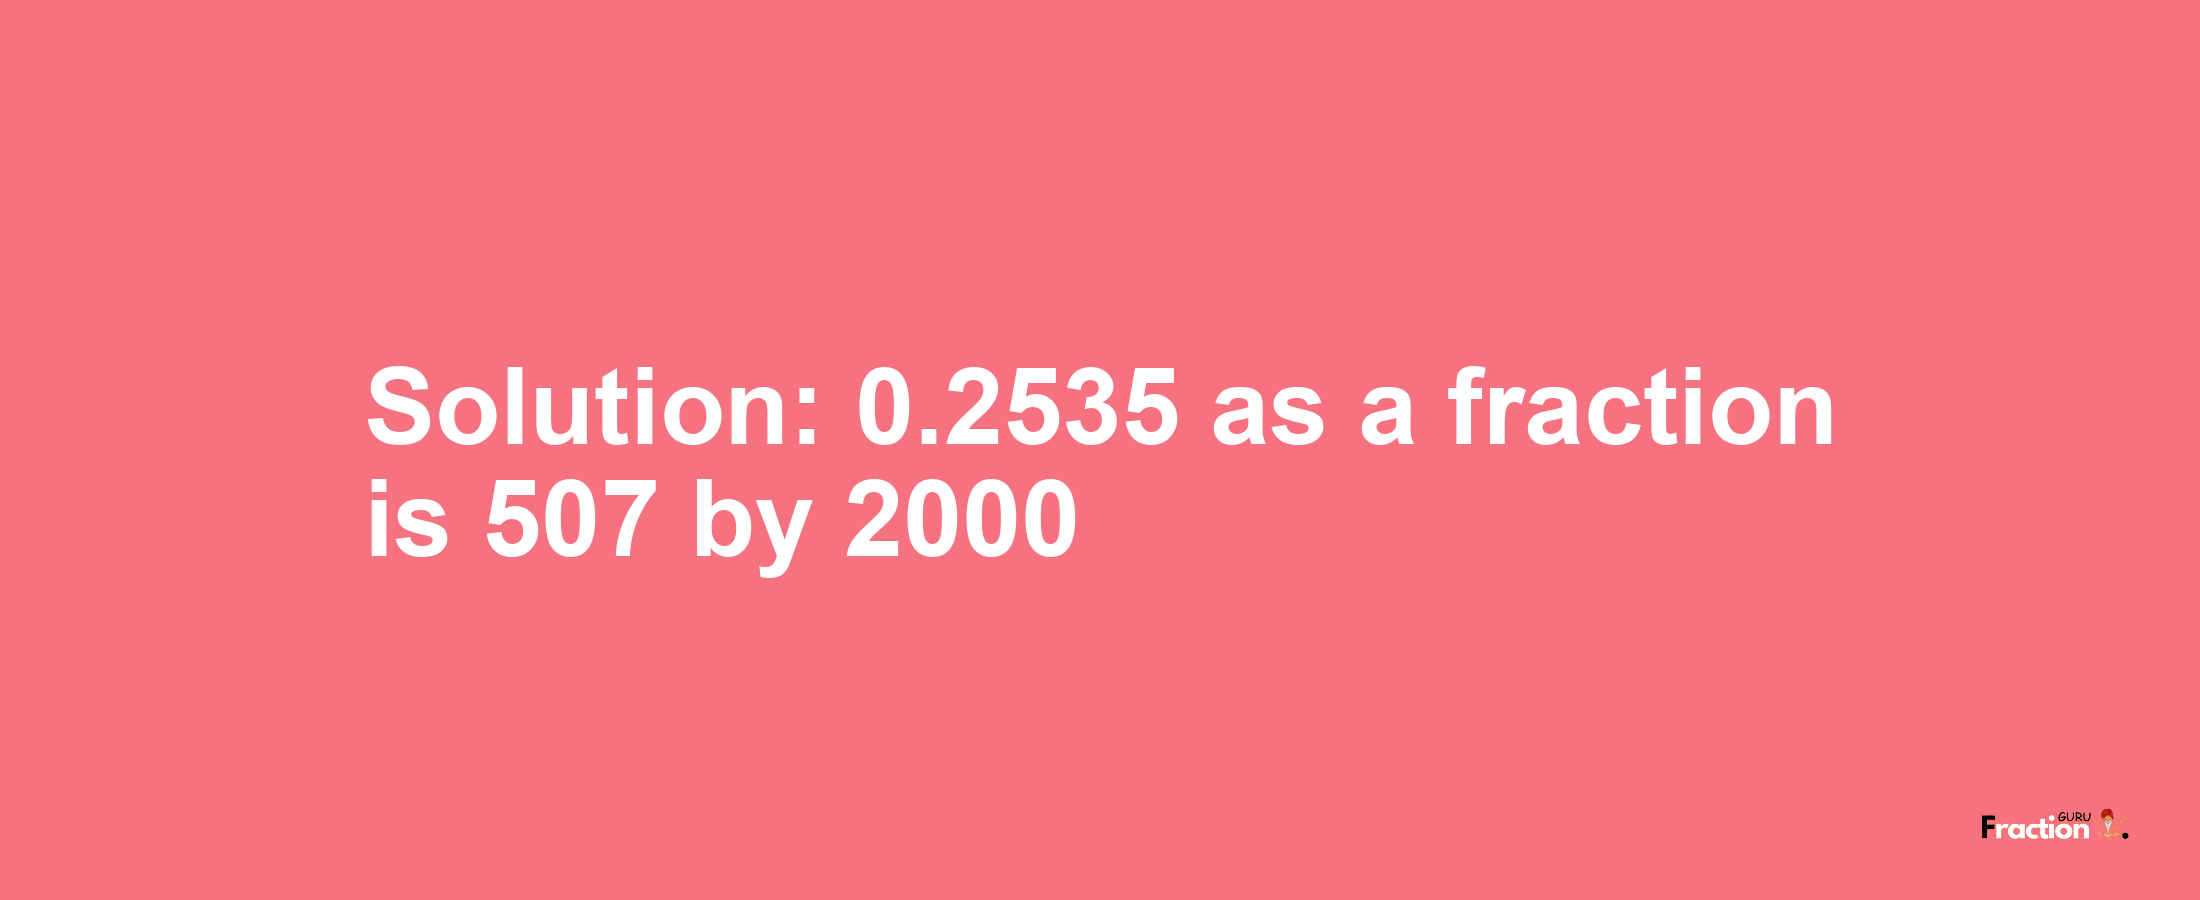 Solution:0.2535 as a fraction is 507/2000